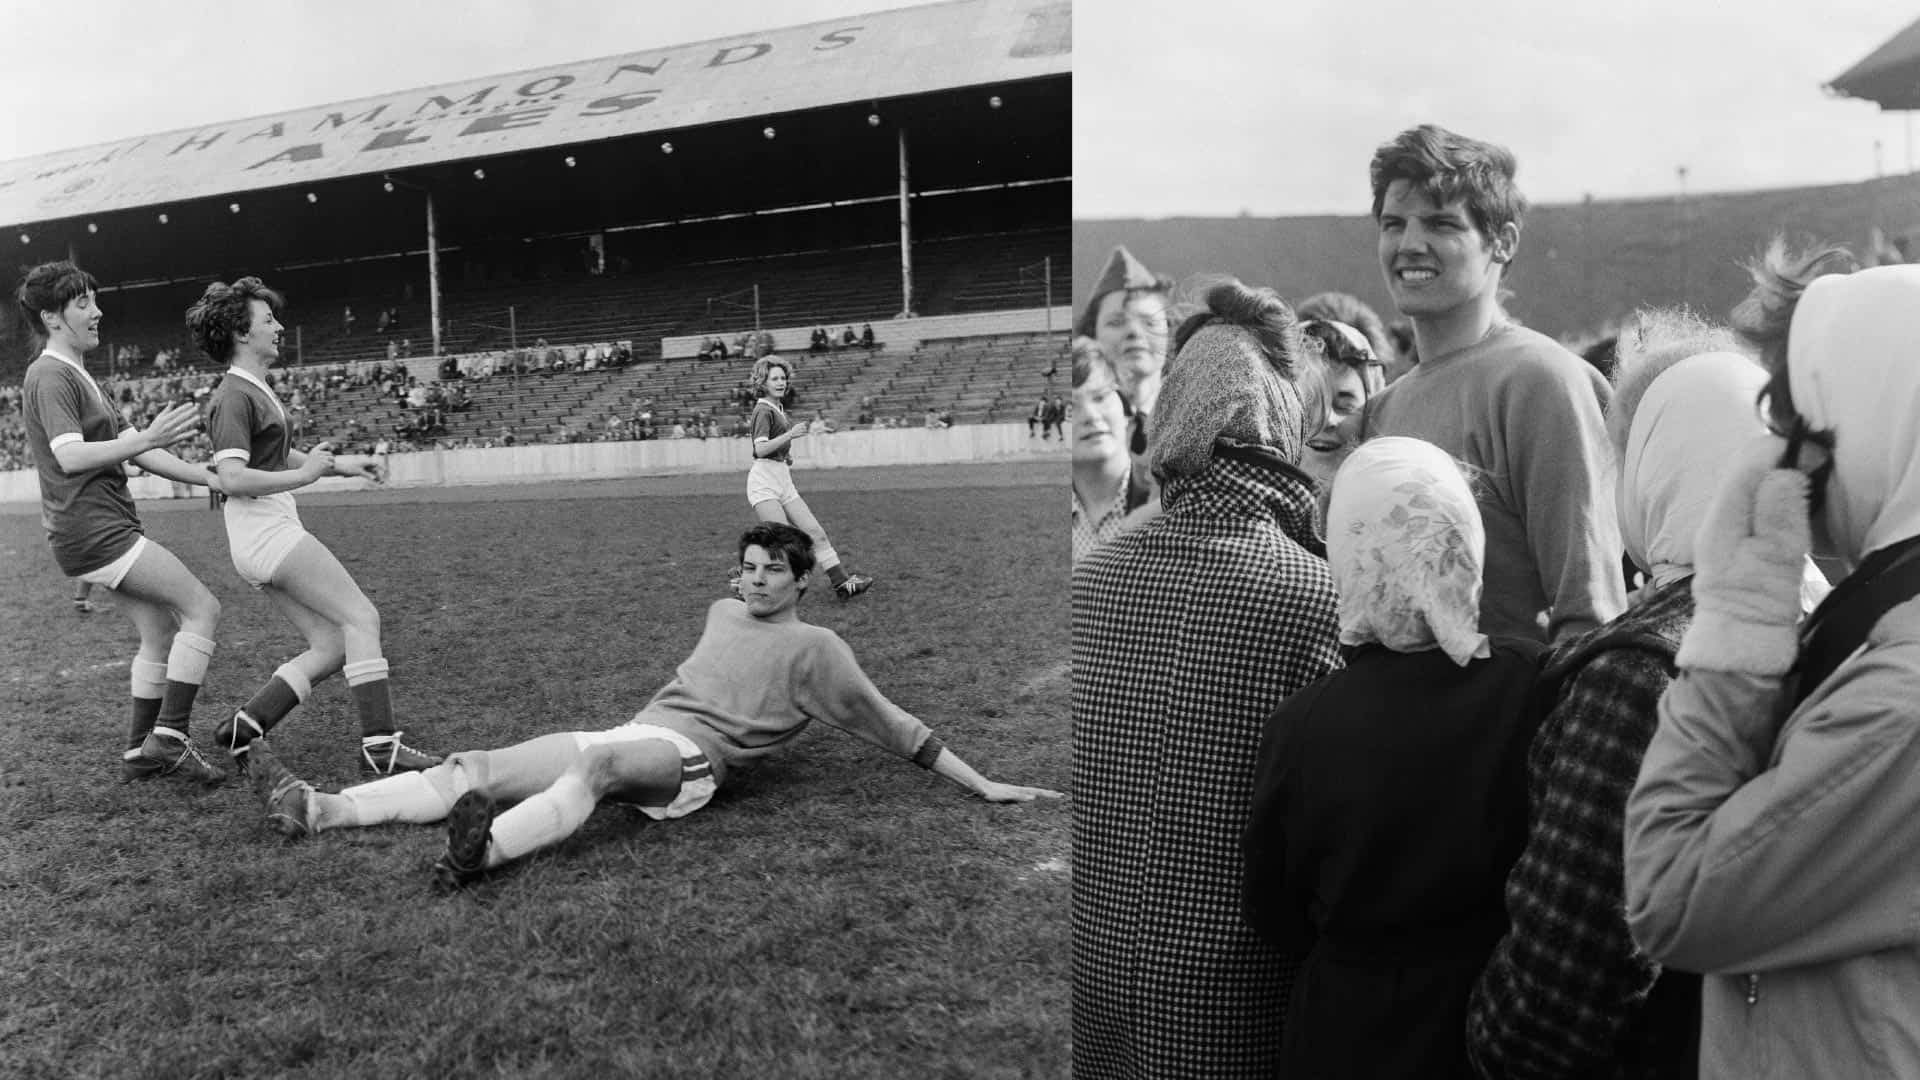 Photos of three Leeds Ladies players scoring past pop star Jess Conrad in 1961, and Jess being mobbed by fans